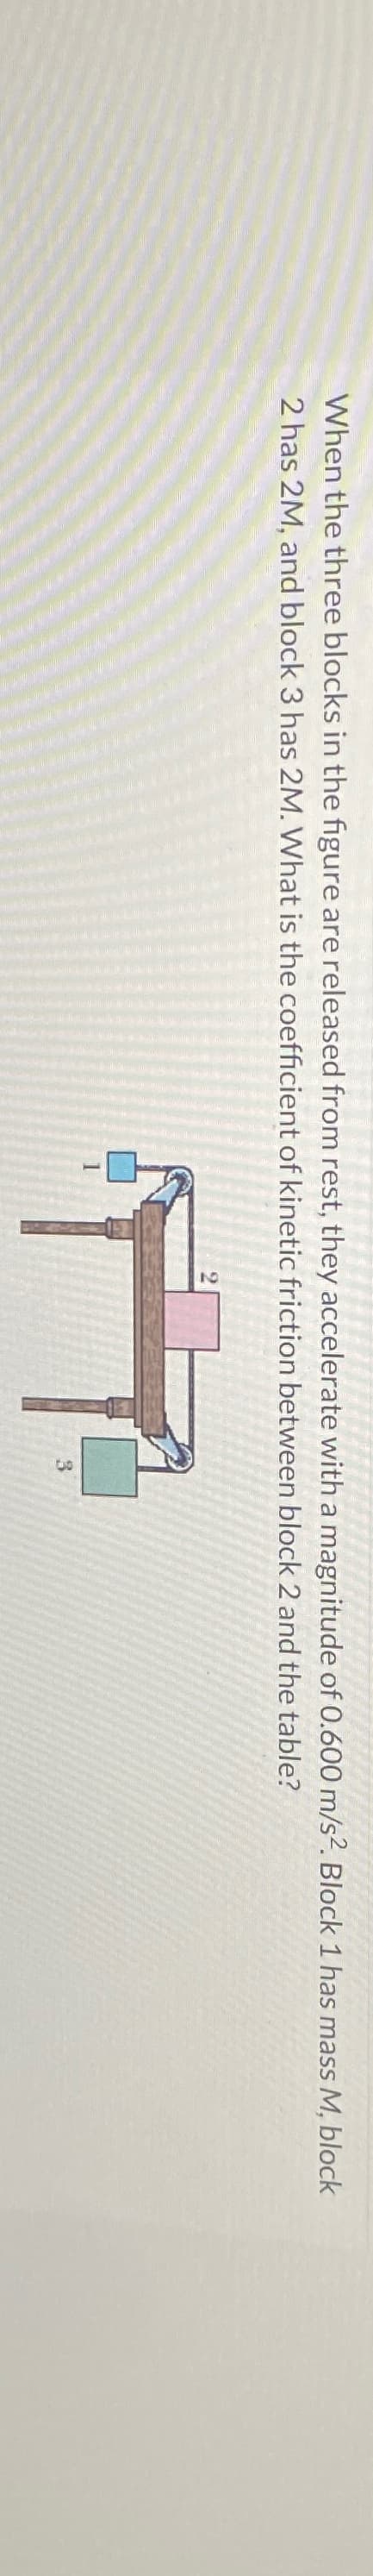 When the three blocks in the figure are released from rest, they accelerate with a magnitude of 0.600 m/s². Block 1 has mass M, block
2 has 2M, and block 3 has 2M. What is the coefficient of kinetic friction between block 2 and the table?
1
3